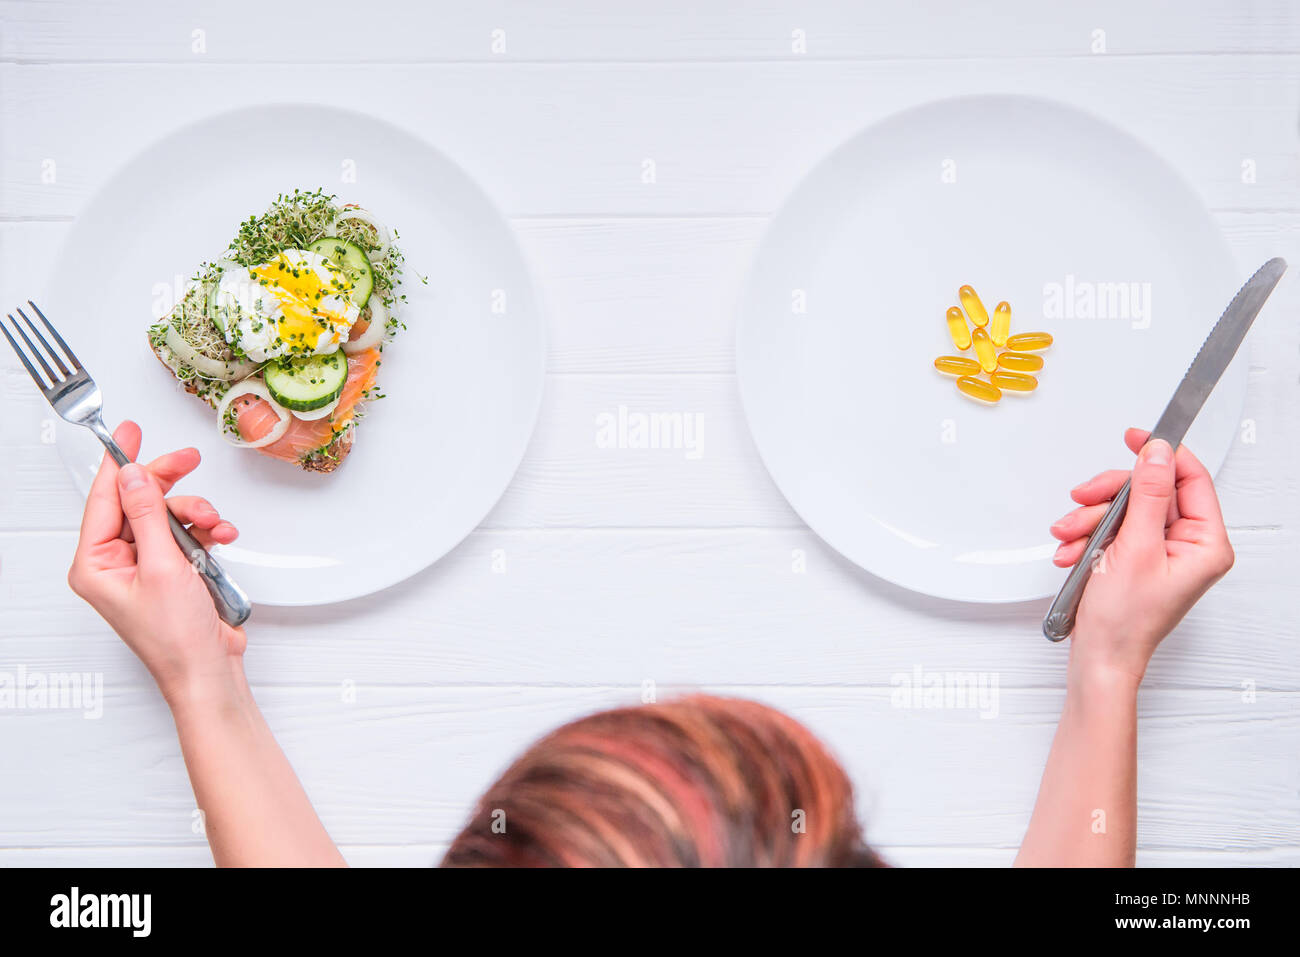 Top view woman with cutlery in hands choosing between healthy food or medical pills on the white plates and wooden table. Choice between natural and synthetic way of health care. Alternative medicine. Stock Photo